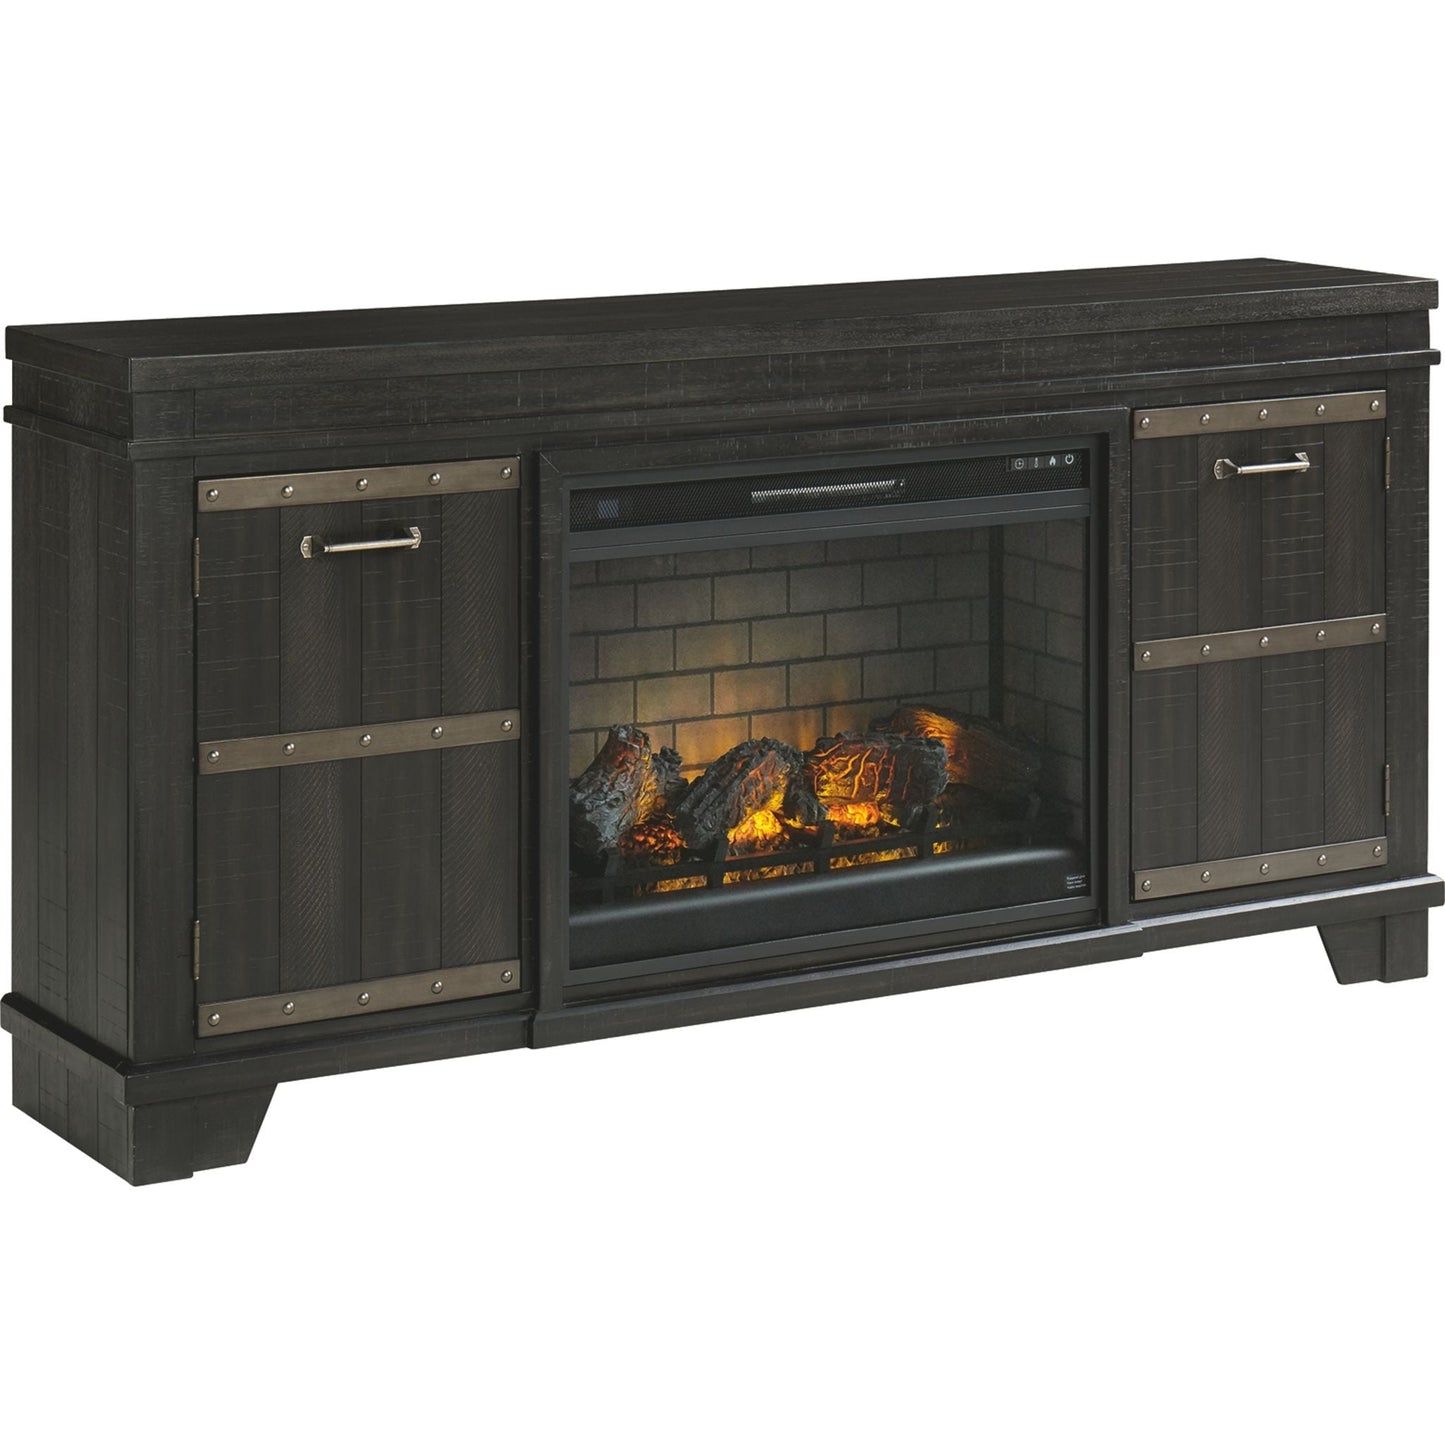 Noorbrook TV Stand with Fireplace - Black